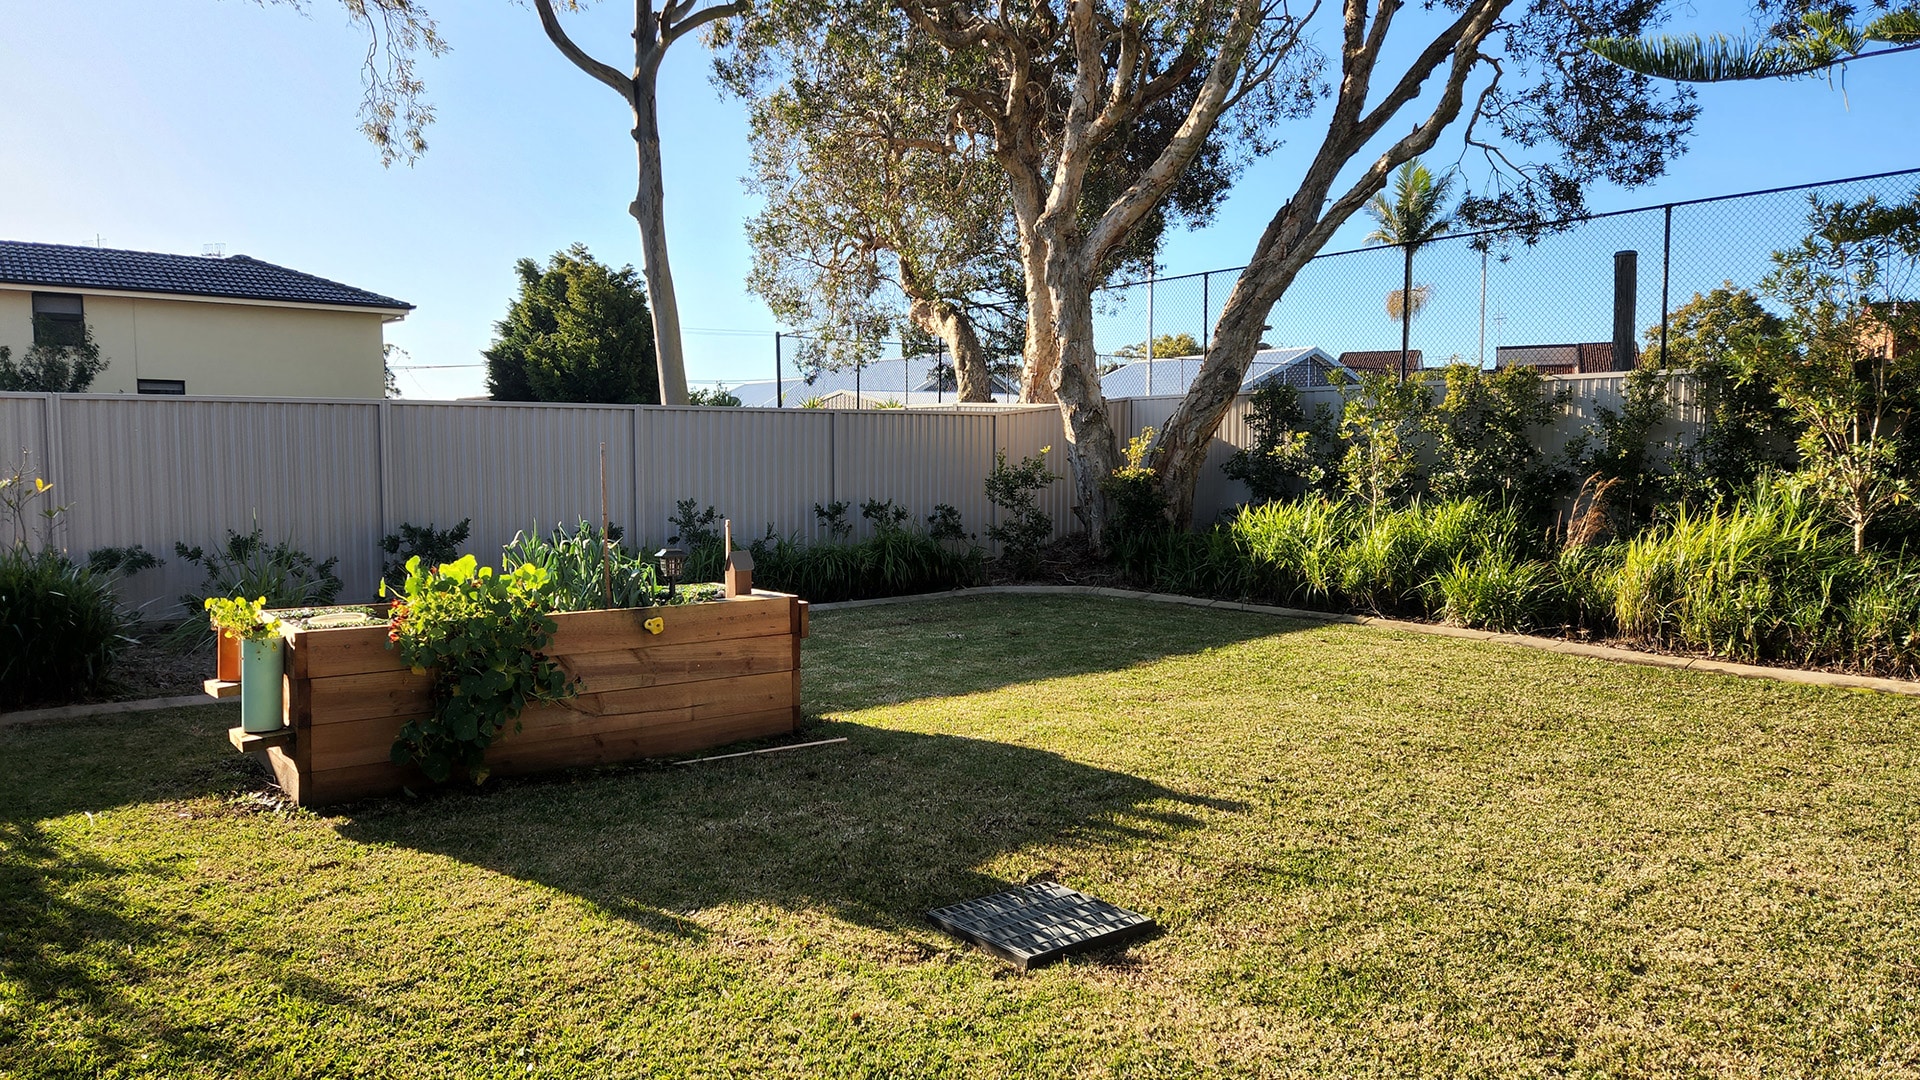 View of the backyard with a large grassed area and garden beds.